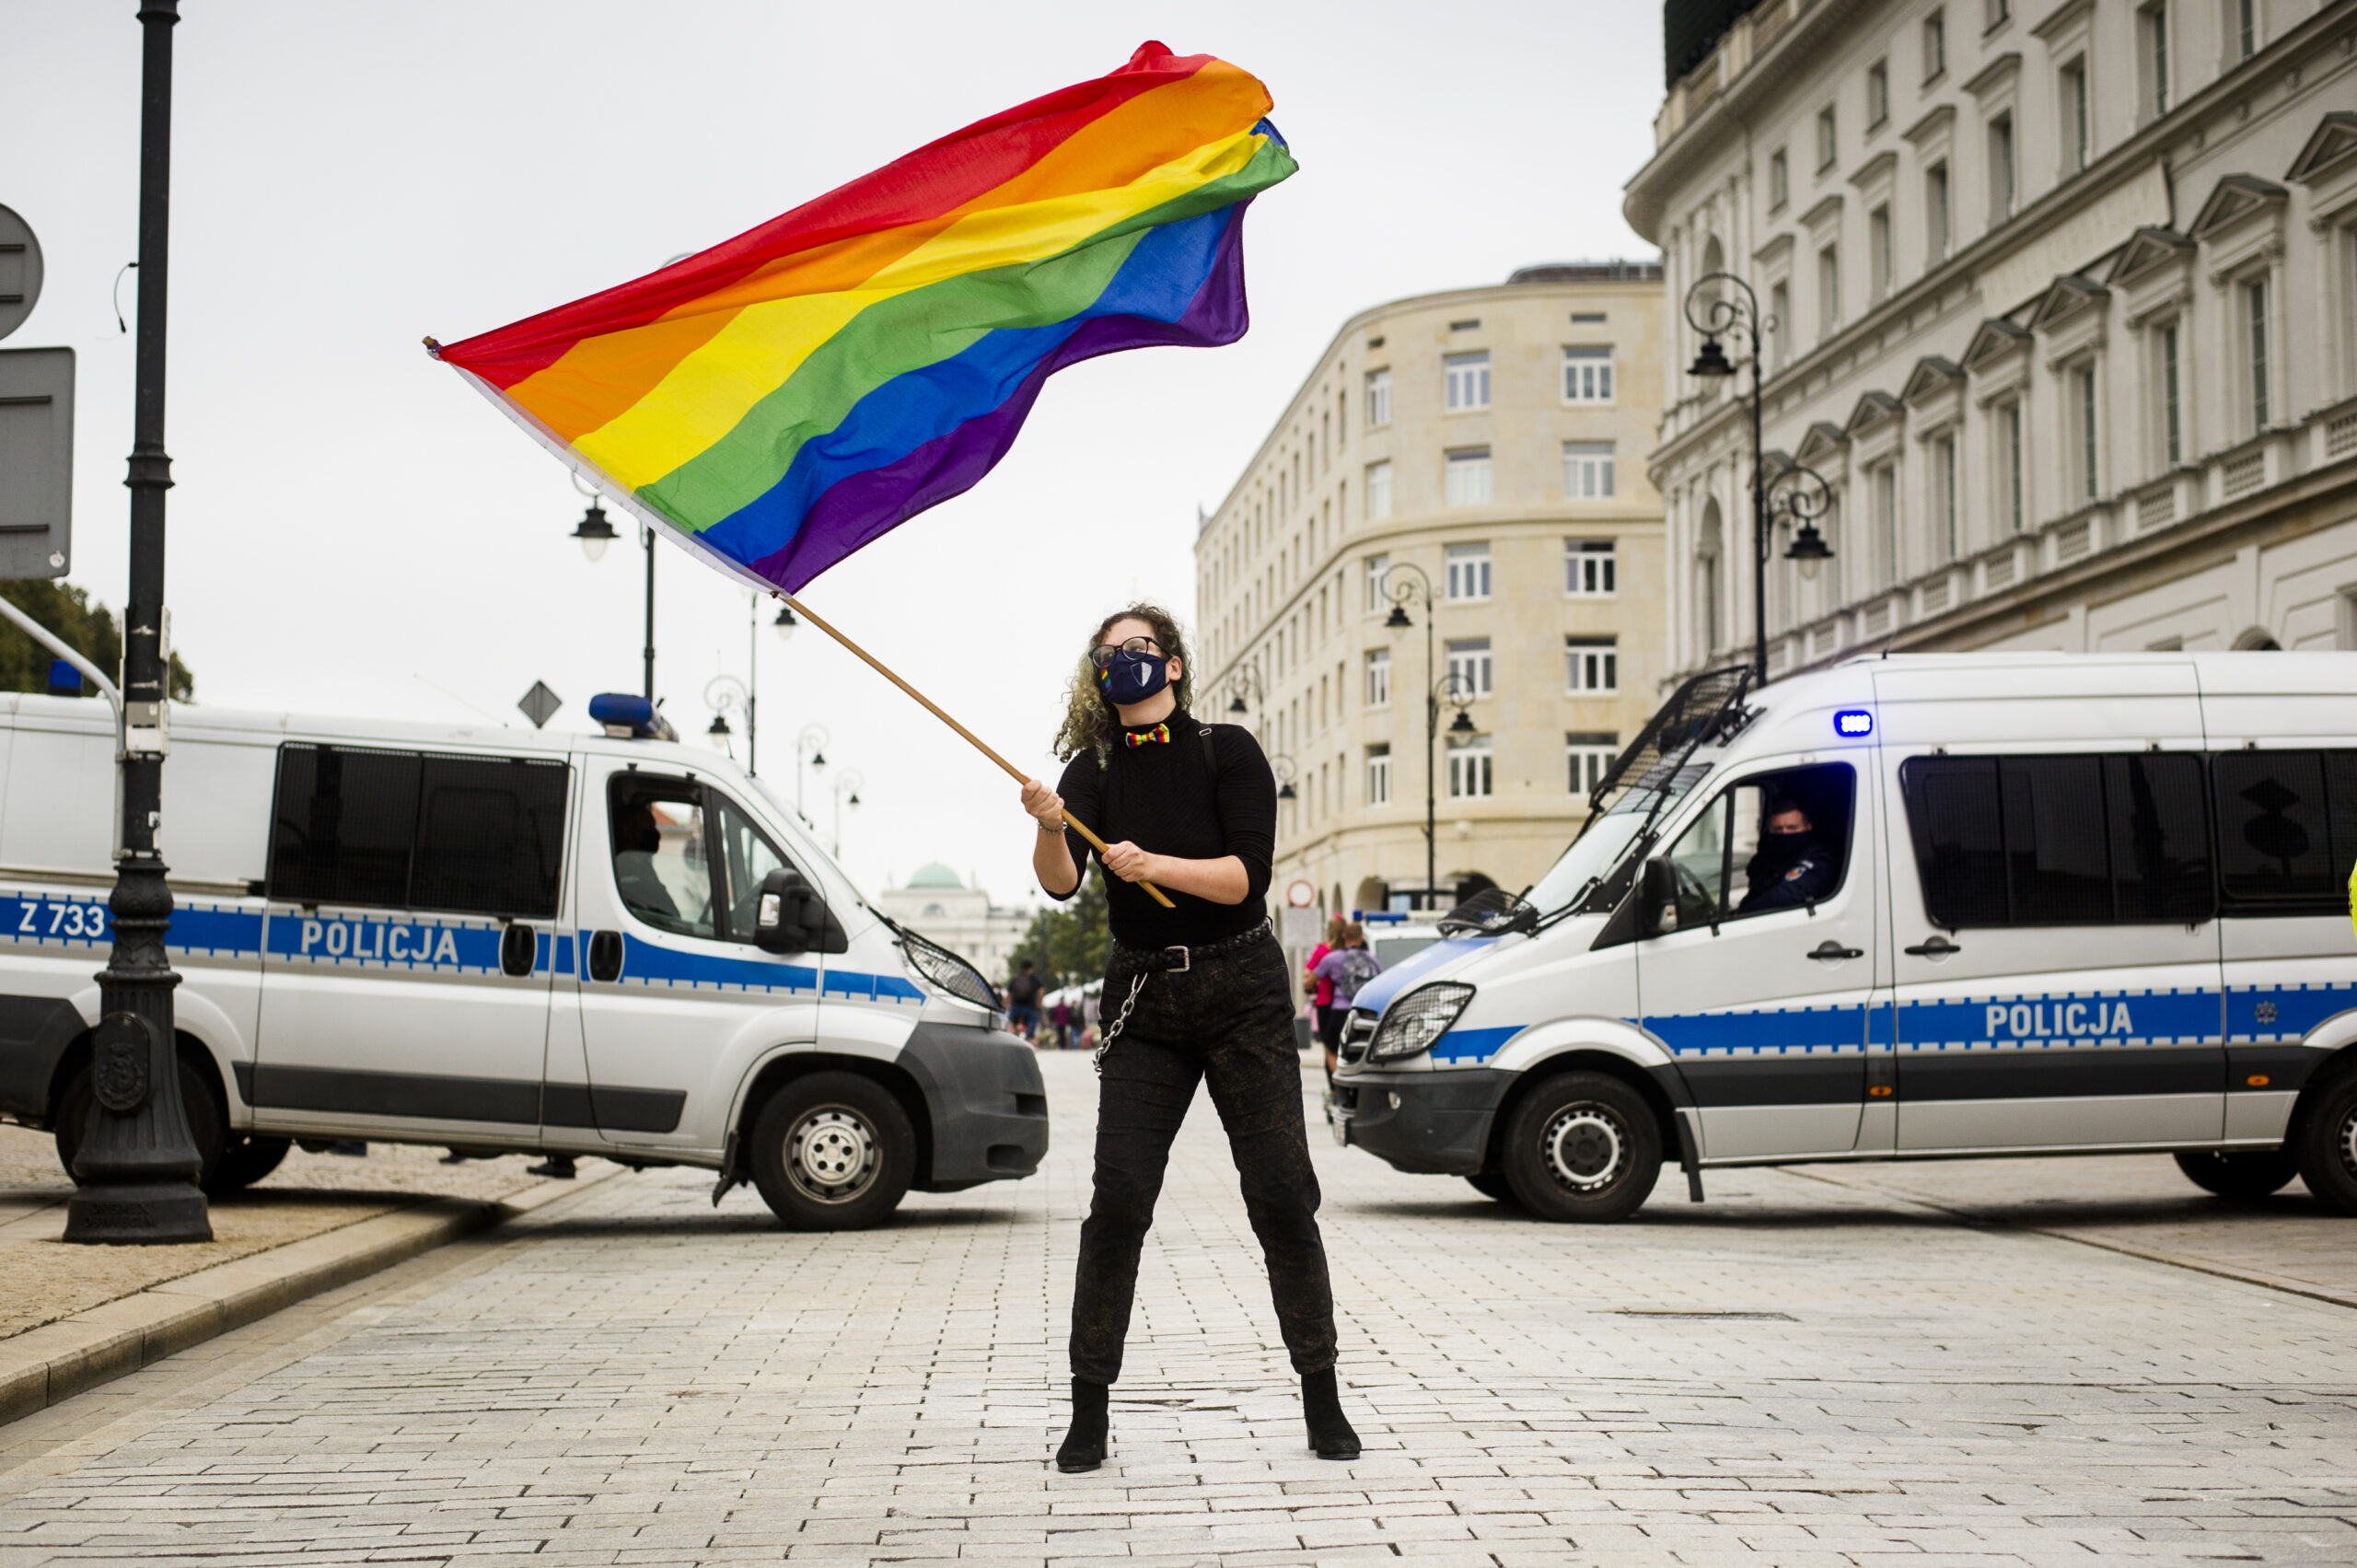 Poland: Authorities must stop hateful rhetoric against LGBTI people and act to protect them from violence and discrimination